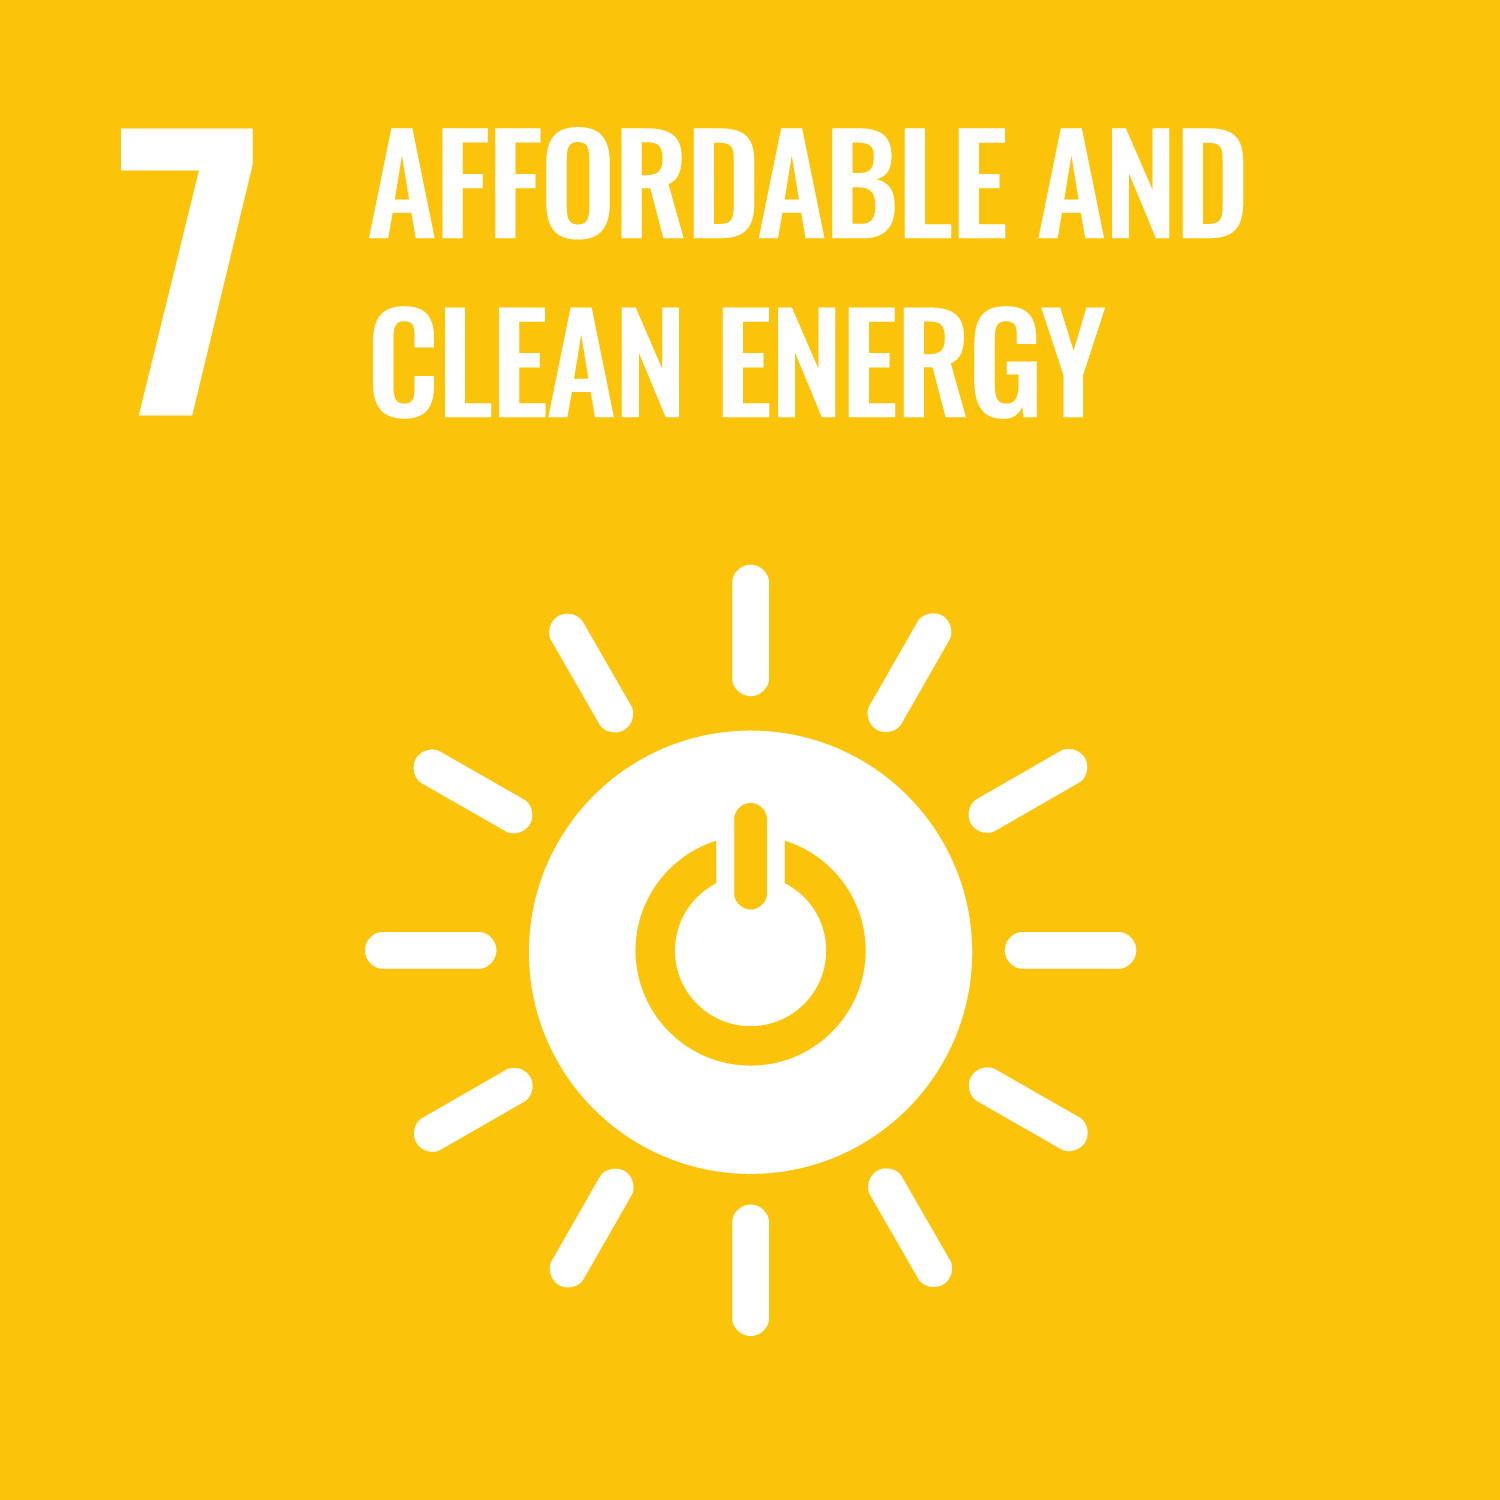 Logo which has the number 7 and the words affordable and clean energy, with a picture of the sun containing the power button icon underneath.